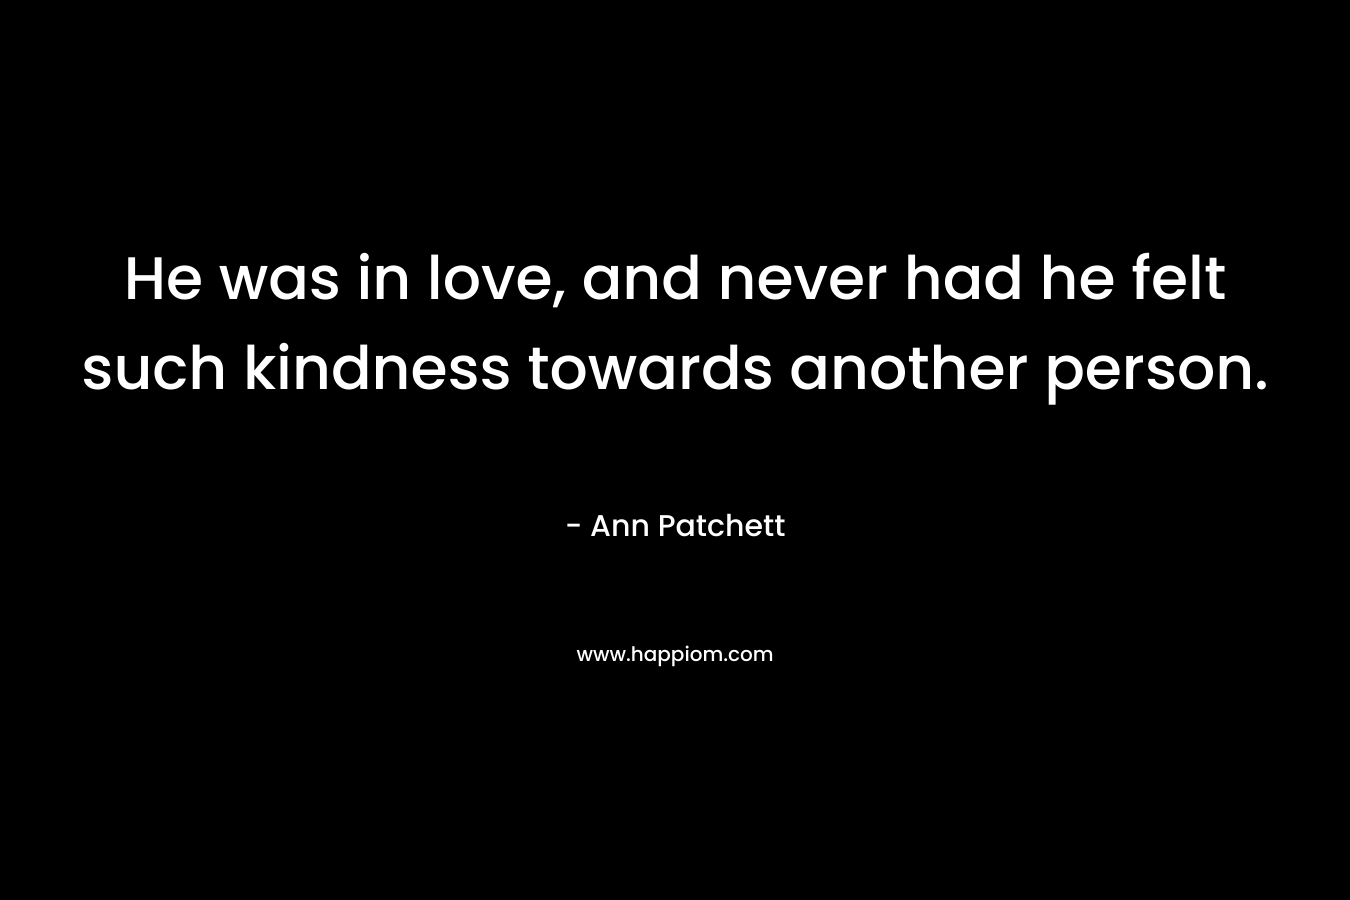 He was in love, and never had he felt such kindness towards another person.